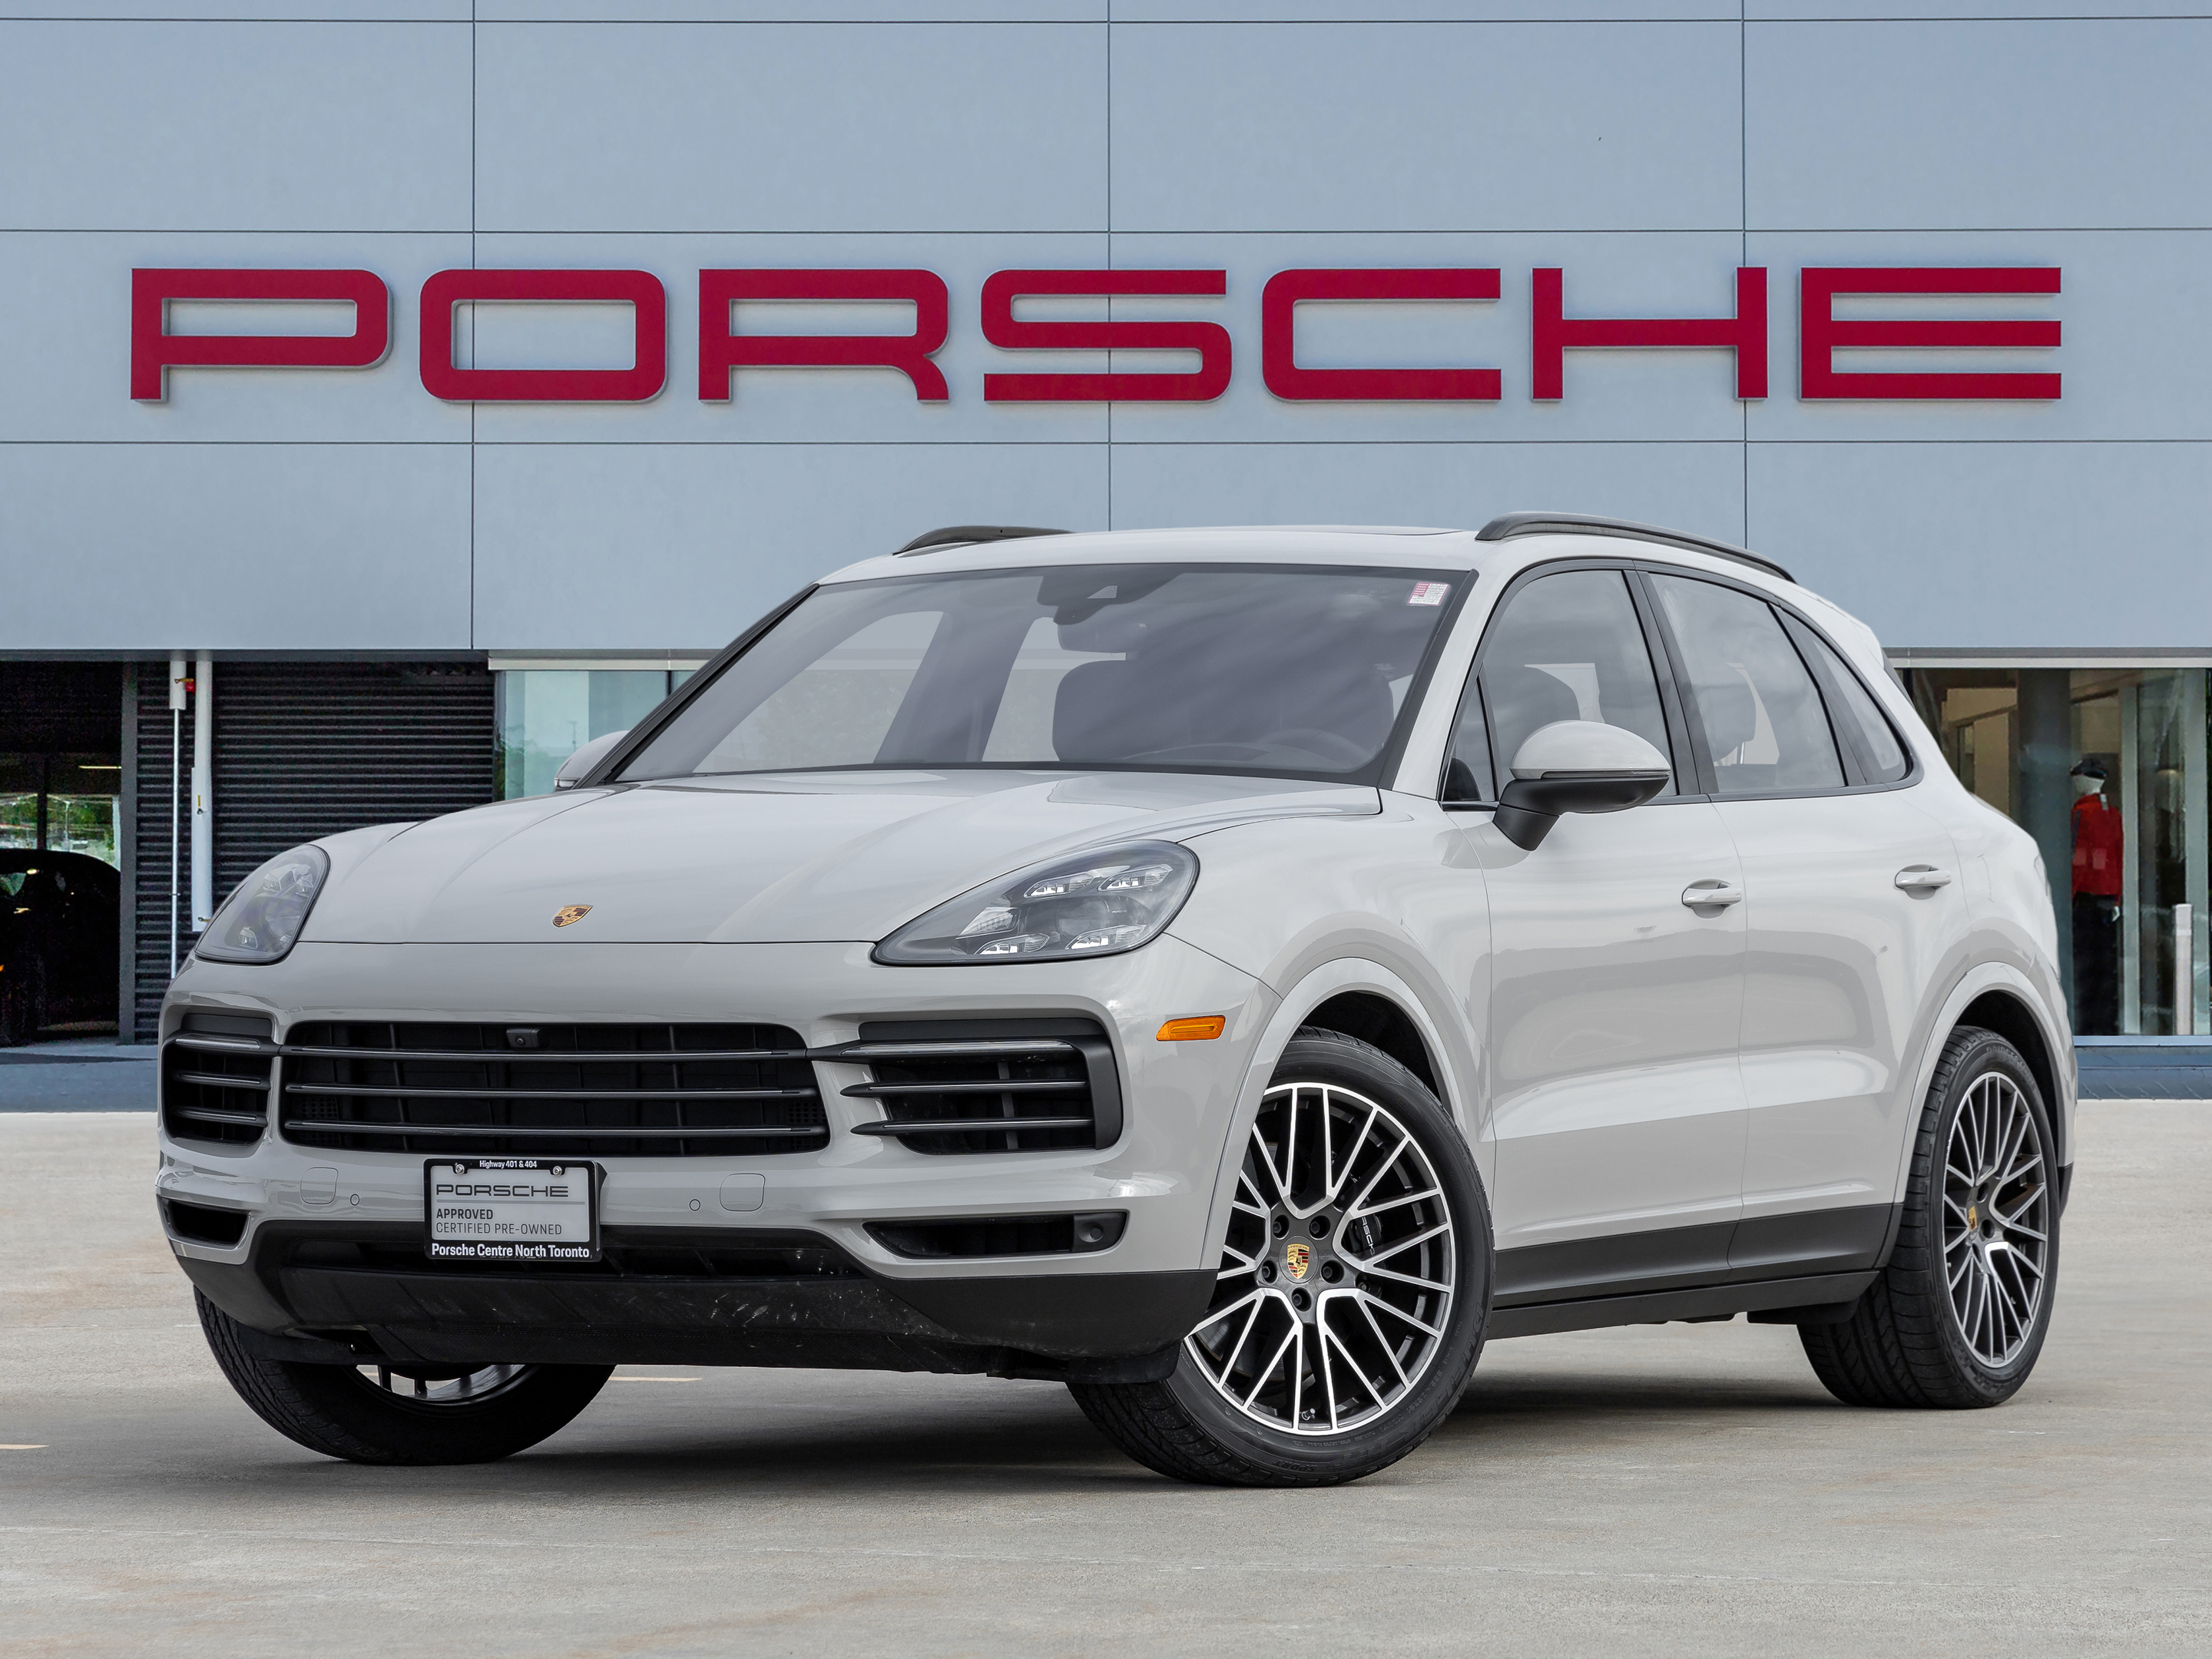 2023 Porsche Cayenne S Platinum Edition | Extended Warranty Included